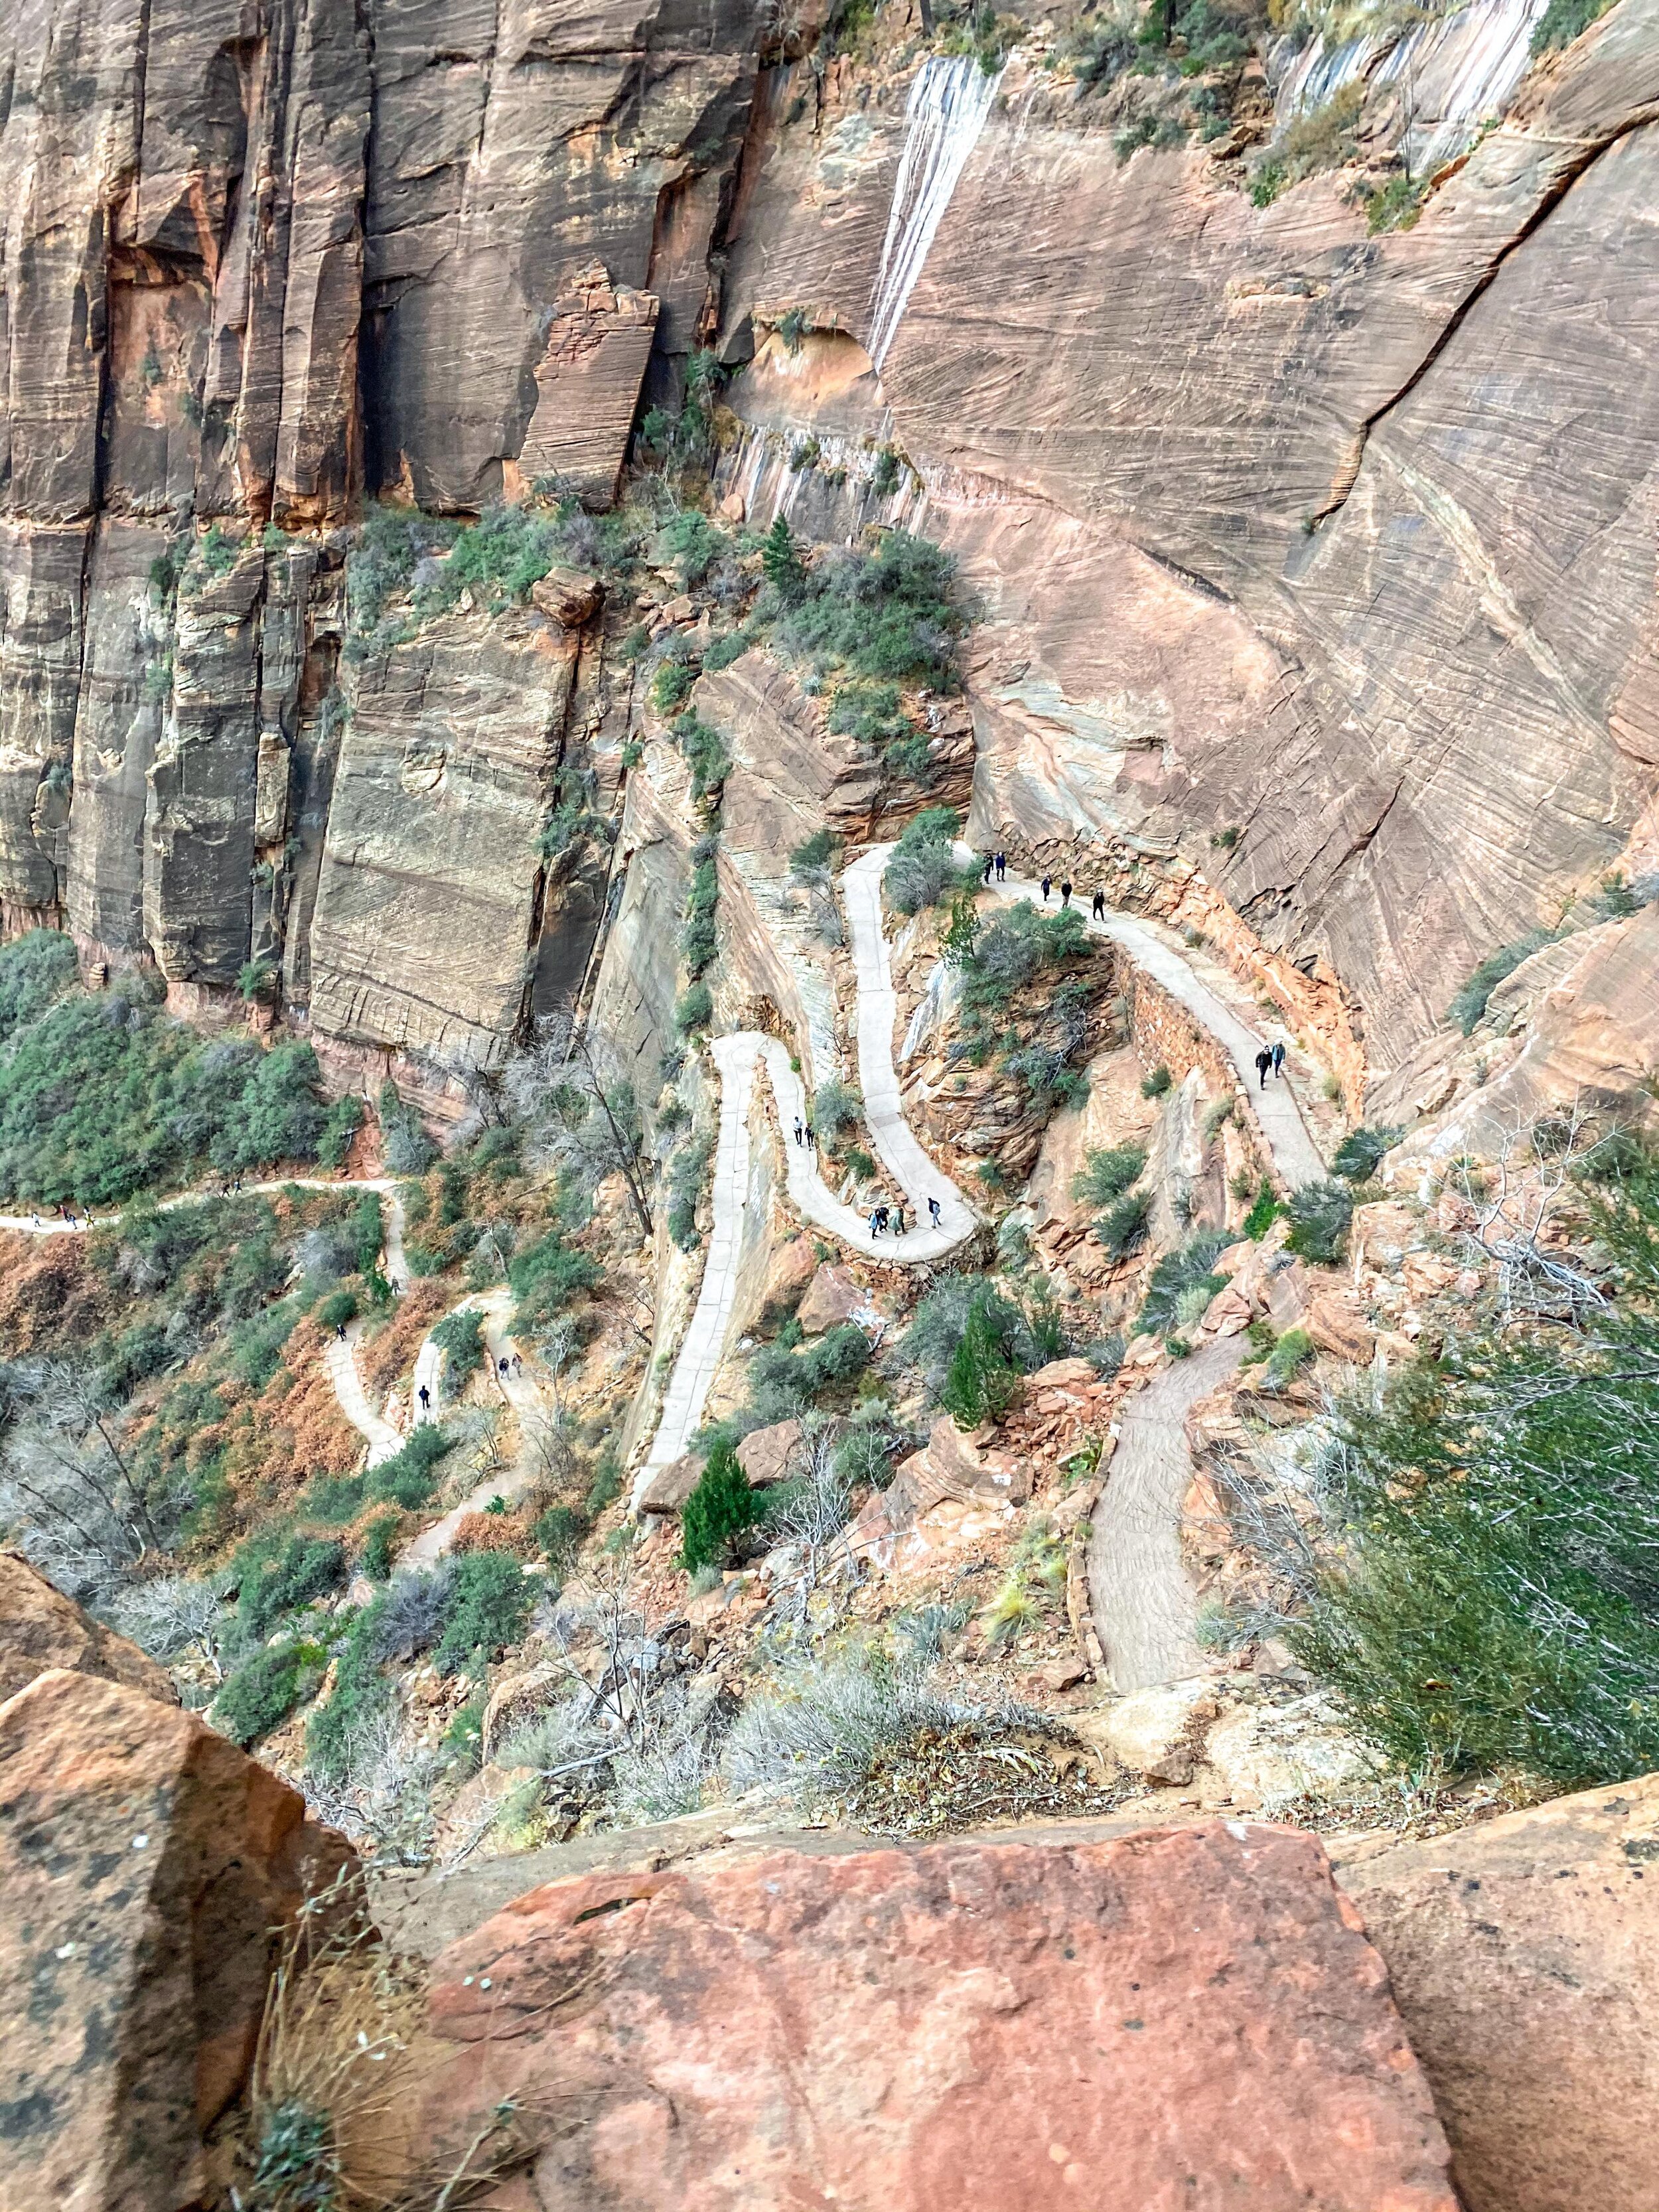 The switchbacks along the trail t Angels landing or scout overlook